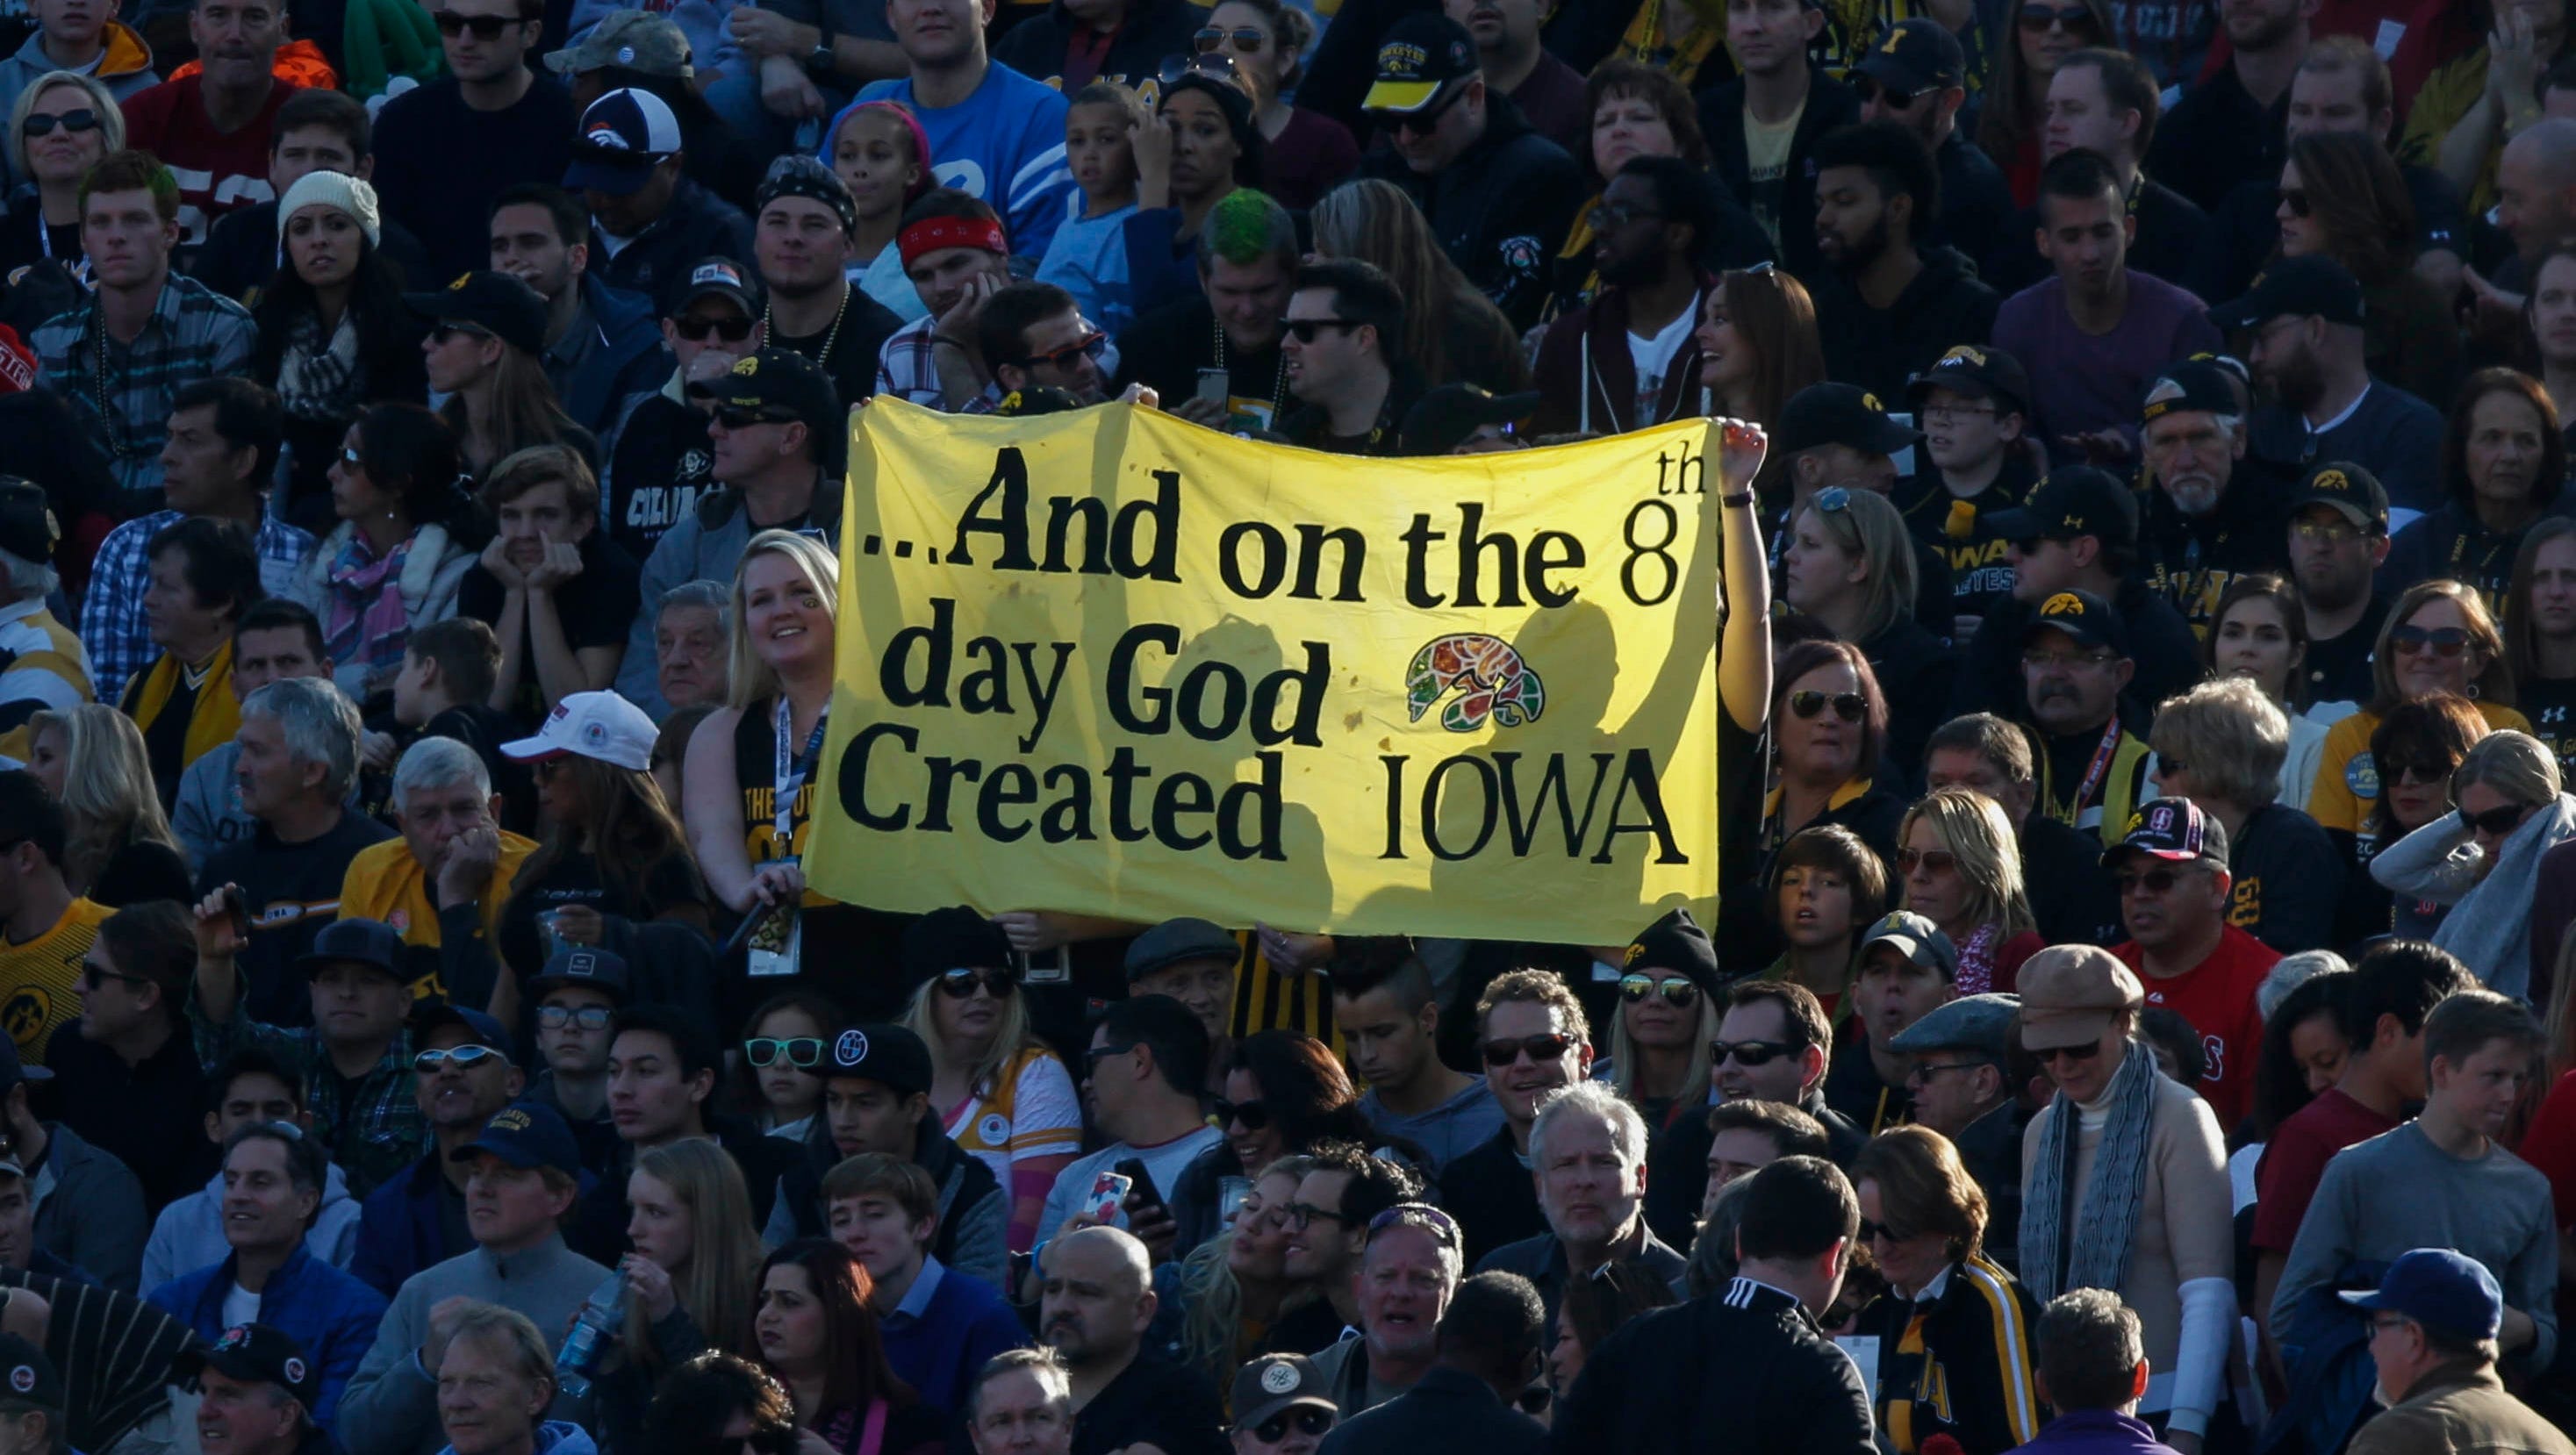 Iowa fans hold up a sign during the game against Stanford on Friday, Jan. 1, 2016, at the Rose Bowl in Pasadena, Calif.